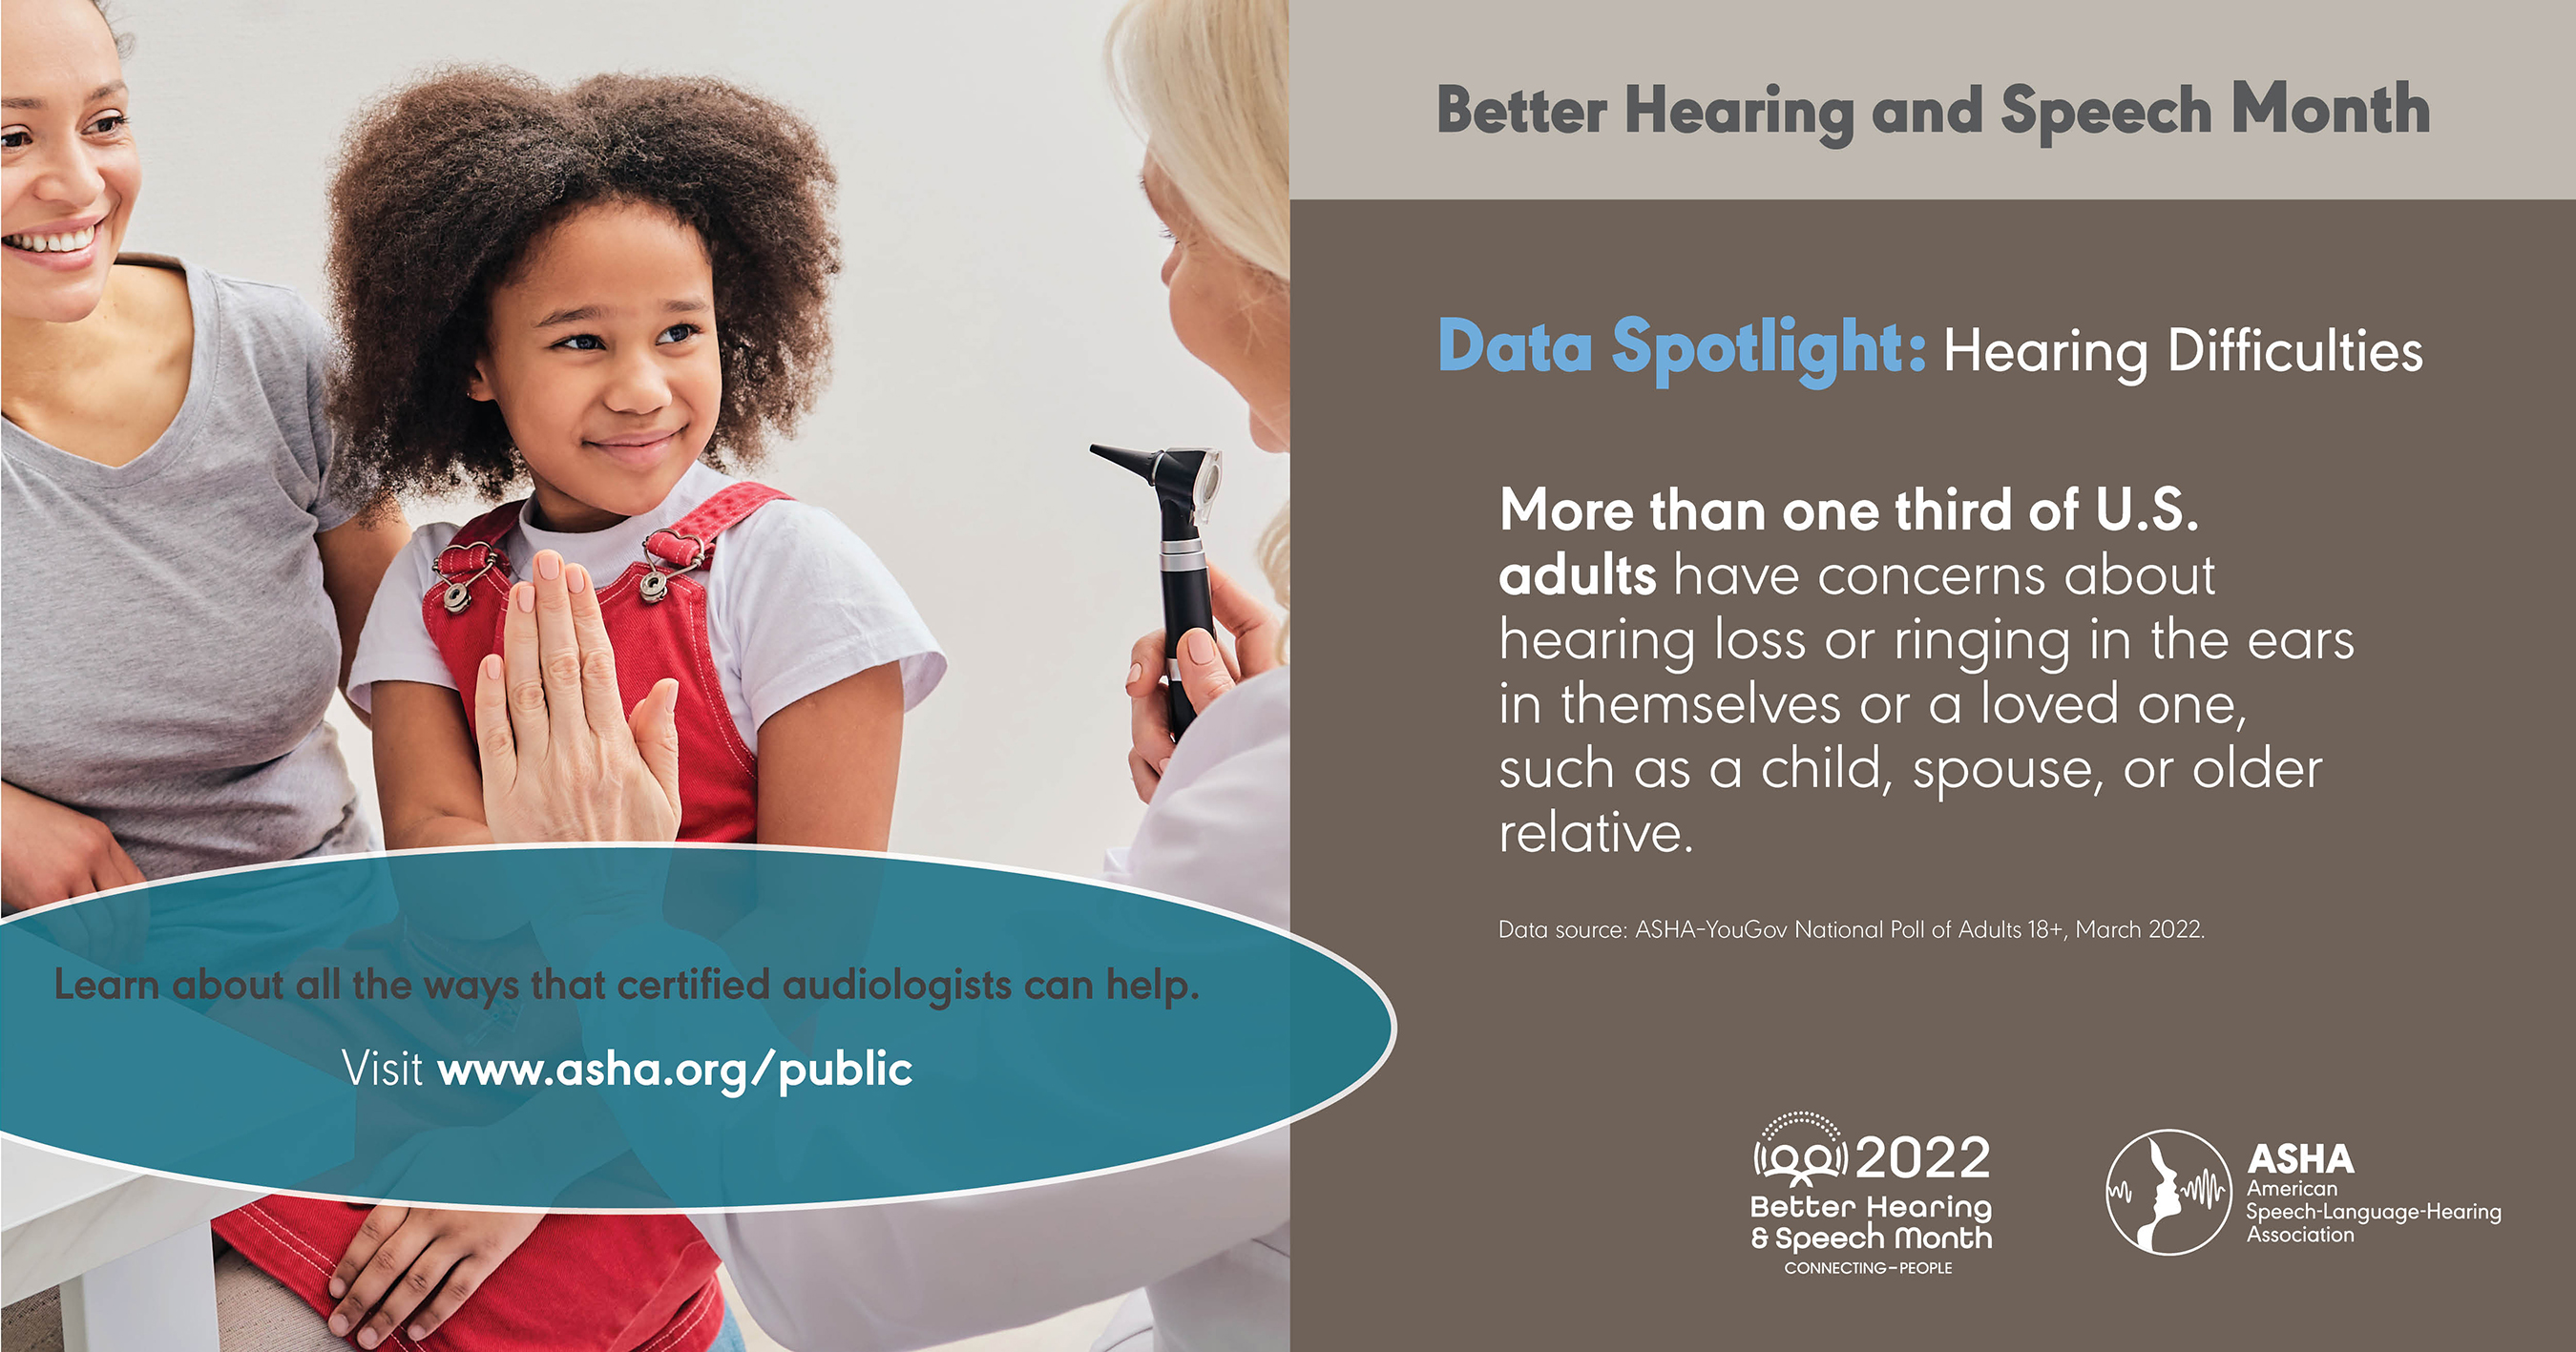 Data Spotlight: Concerns About Hearing